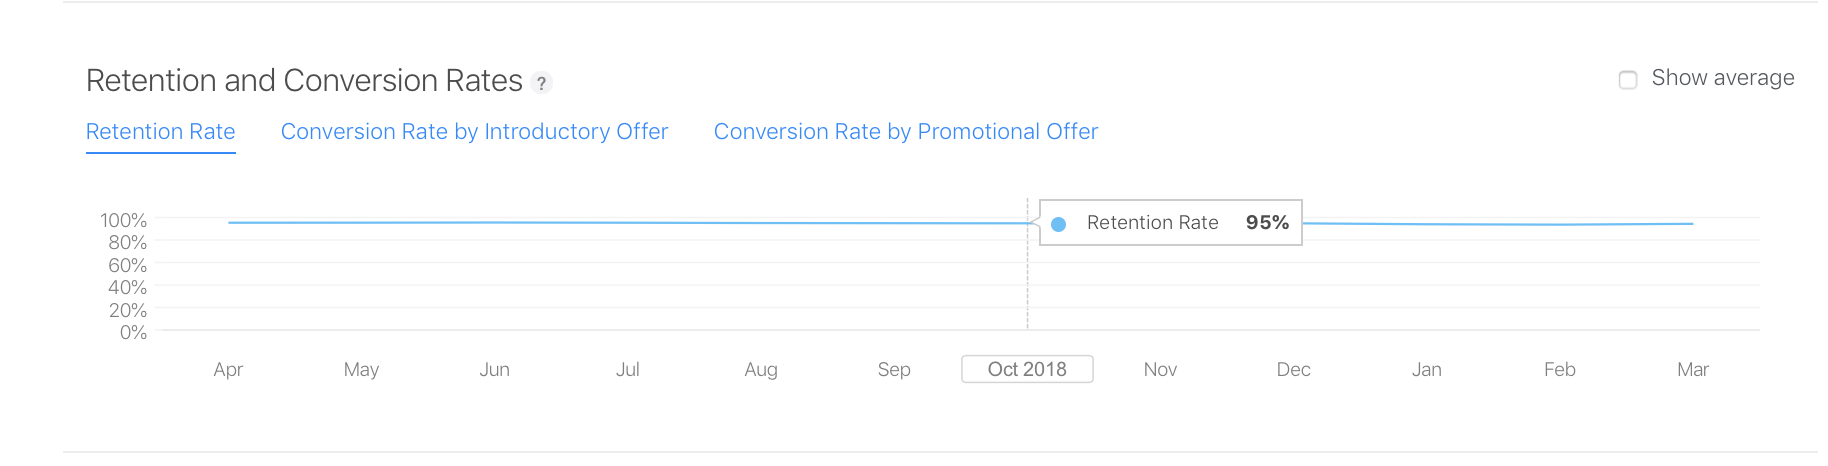 View retention and conversion rates